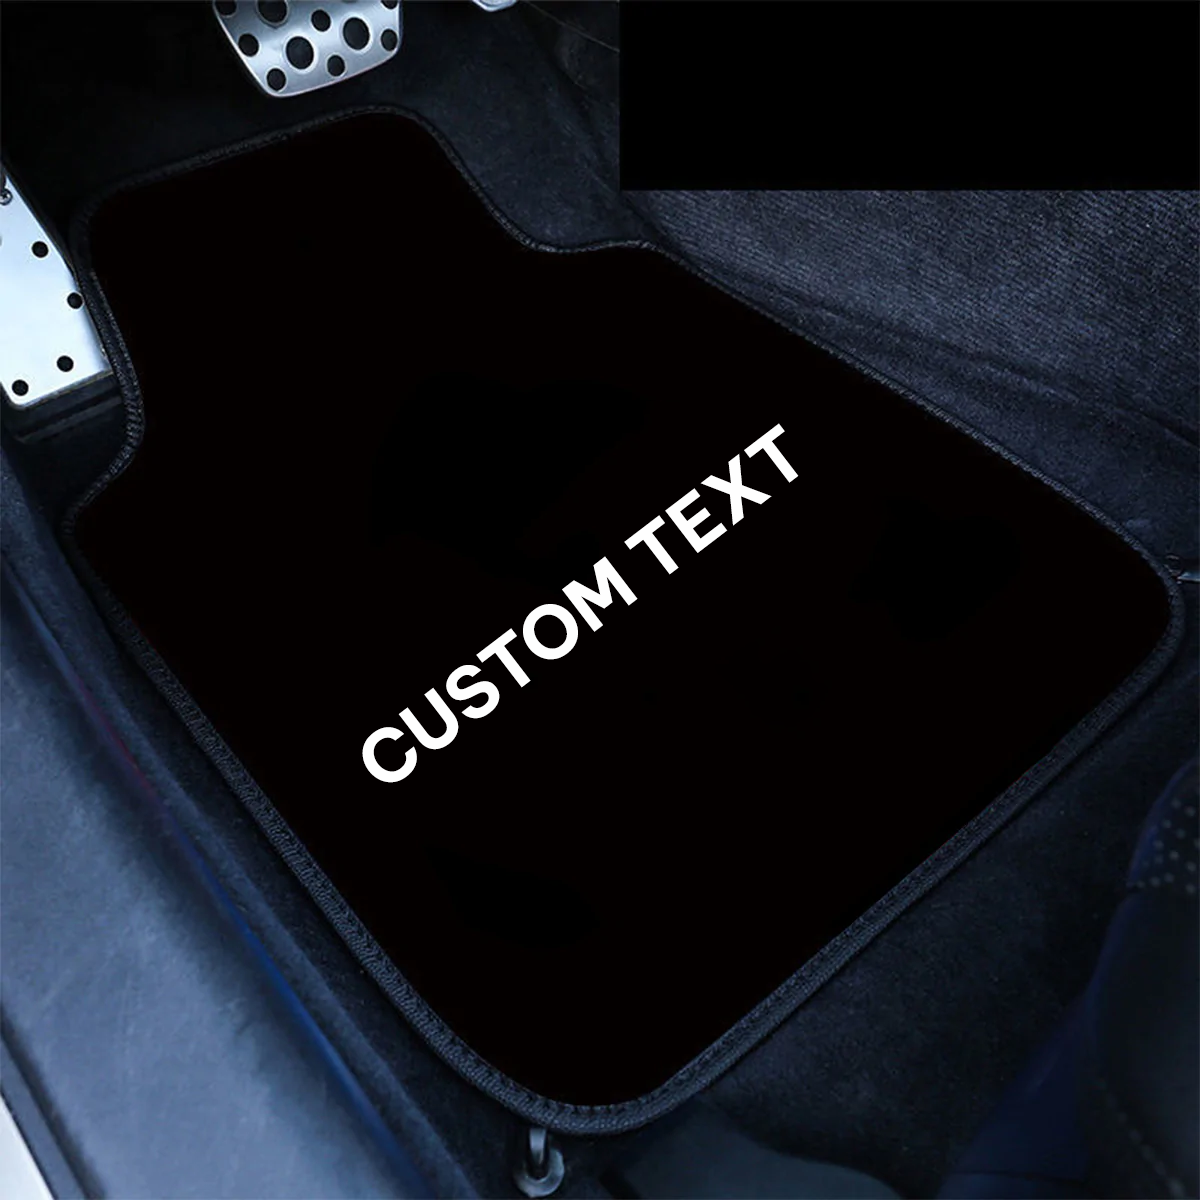 Custom Text and Logo Carpet Floor Mats Set of 4pcs, Fit with all car, All Weather Protection, Universal Type - Delicate Leather